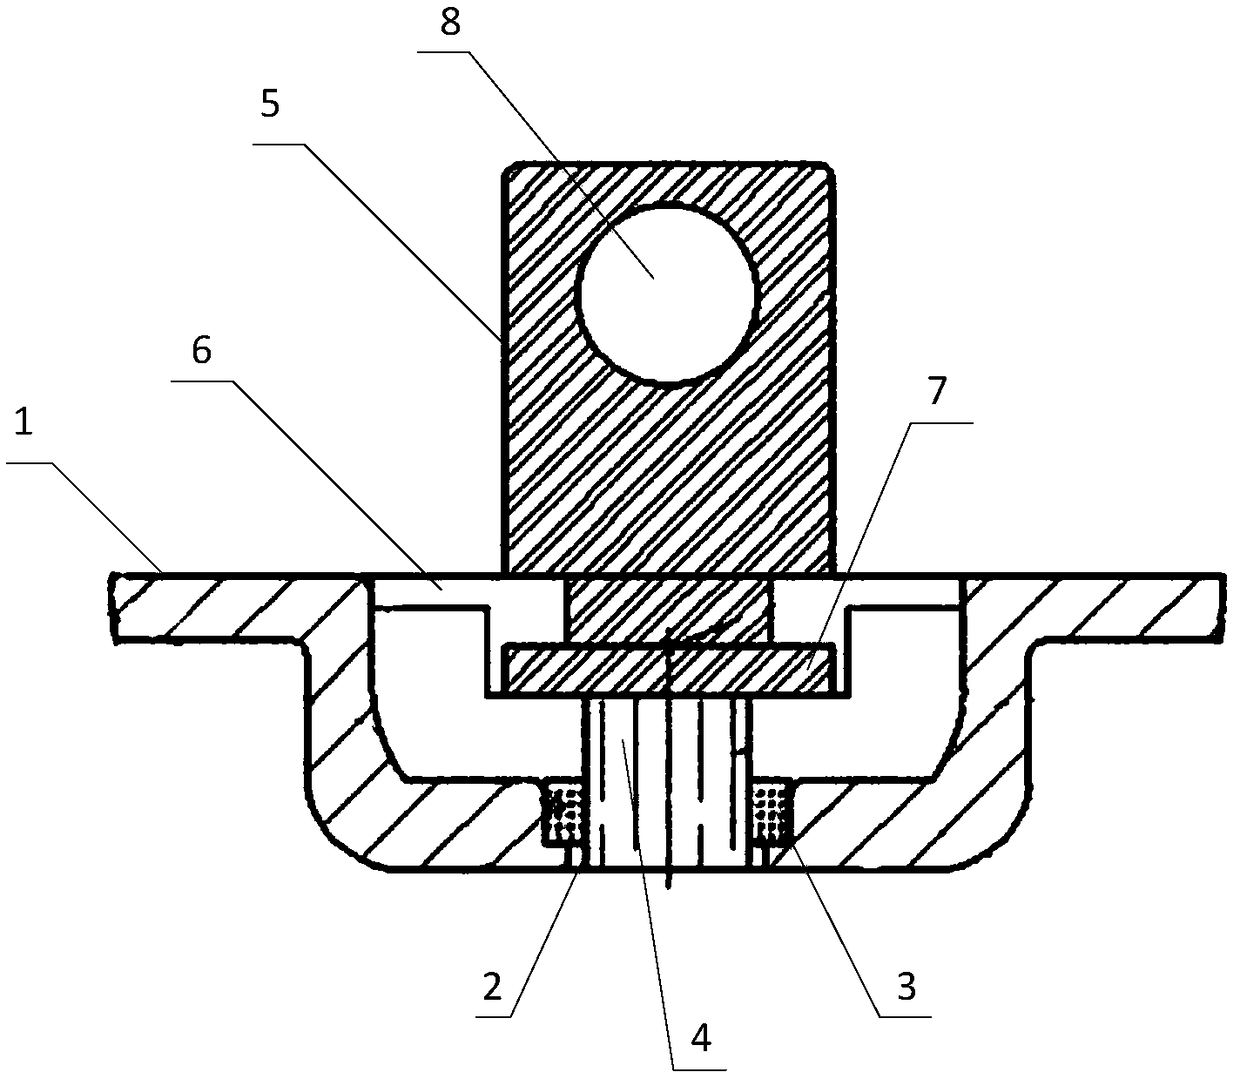 A device for sealing battery terminals and a method for realizing the same